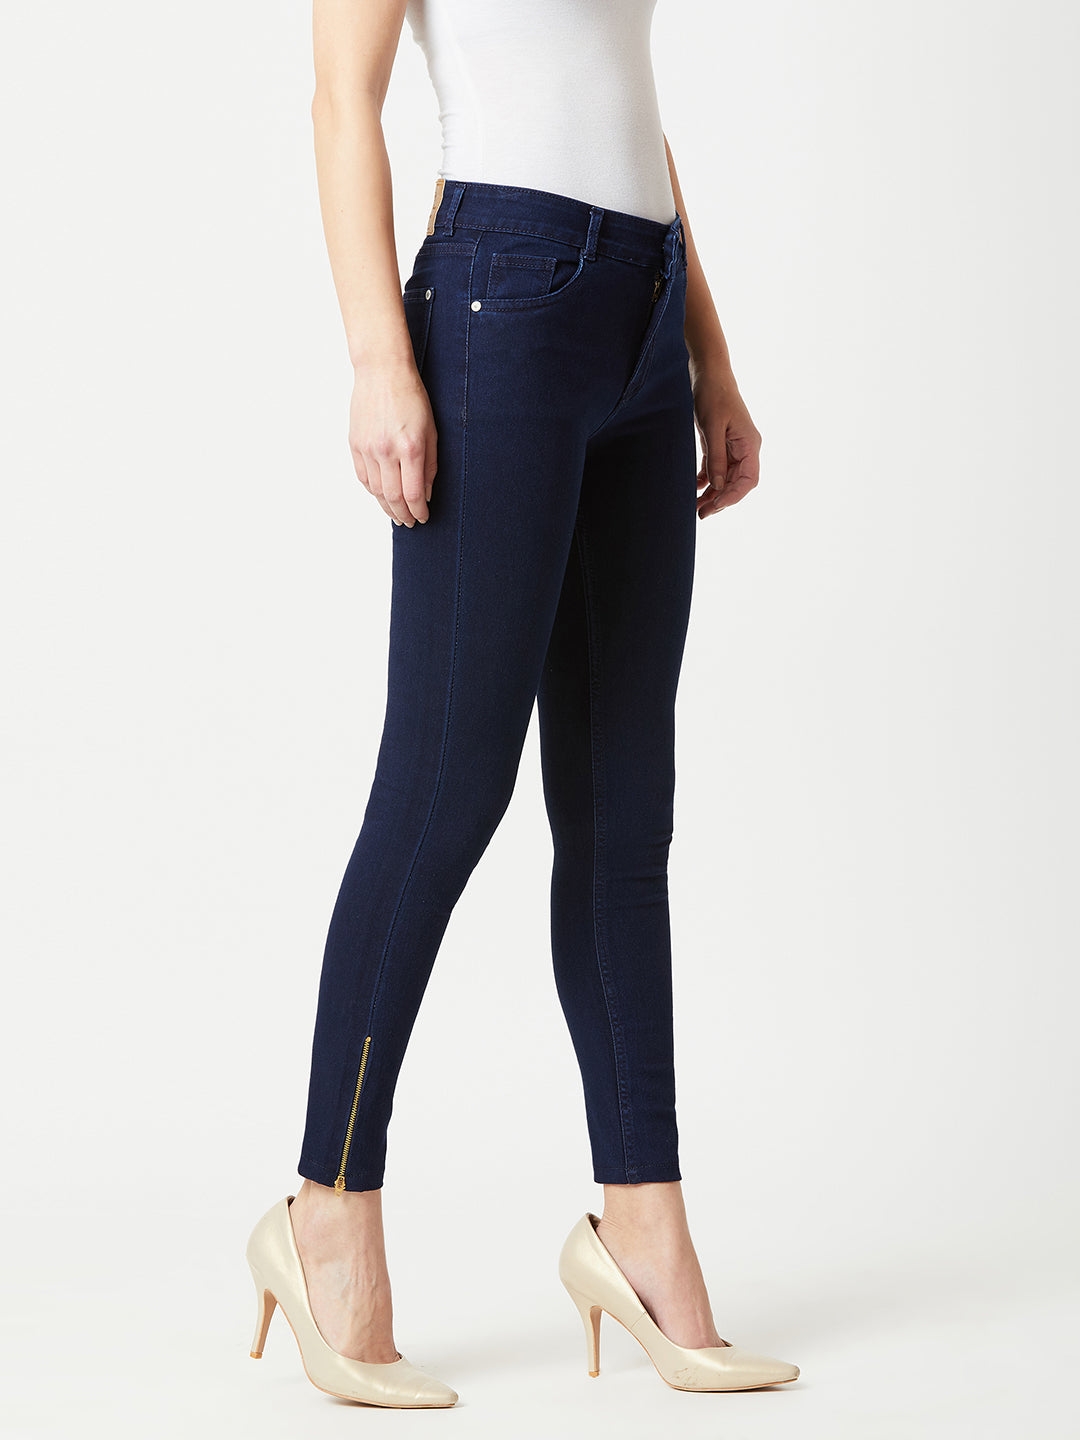 MISS CHASE | Navy Blue Skinny Fit Mid Rise Cropped Length Zipper Detailing Denim Stretchable Jeans